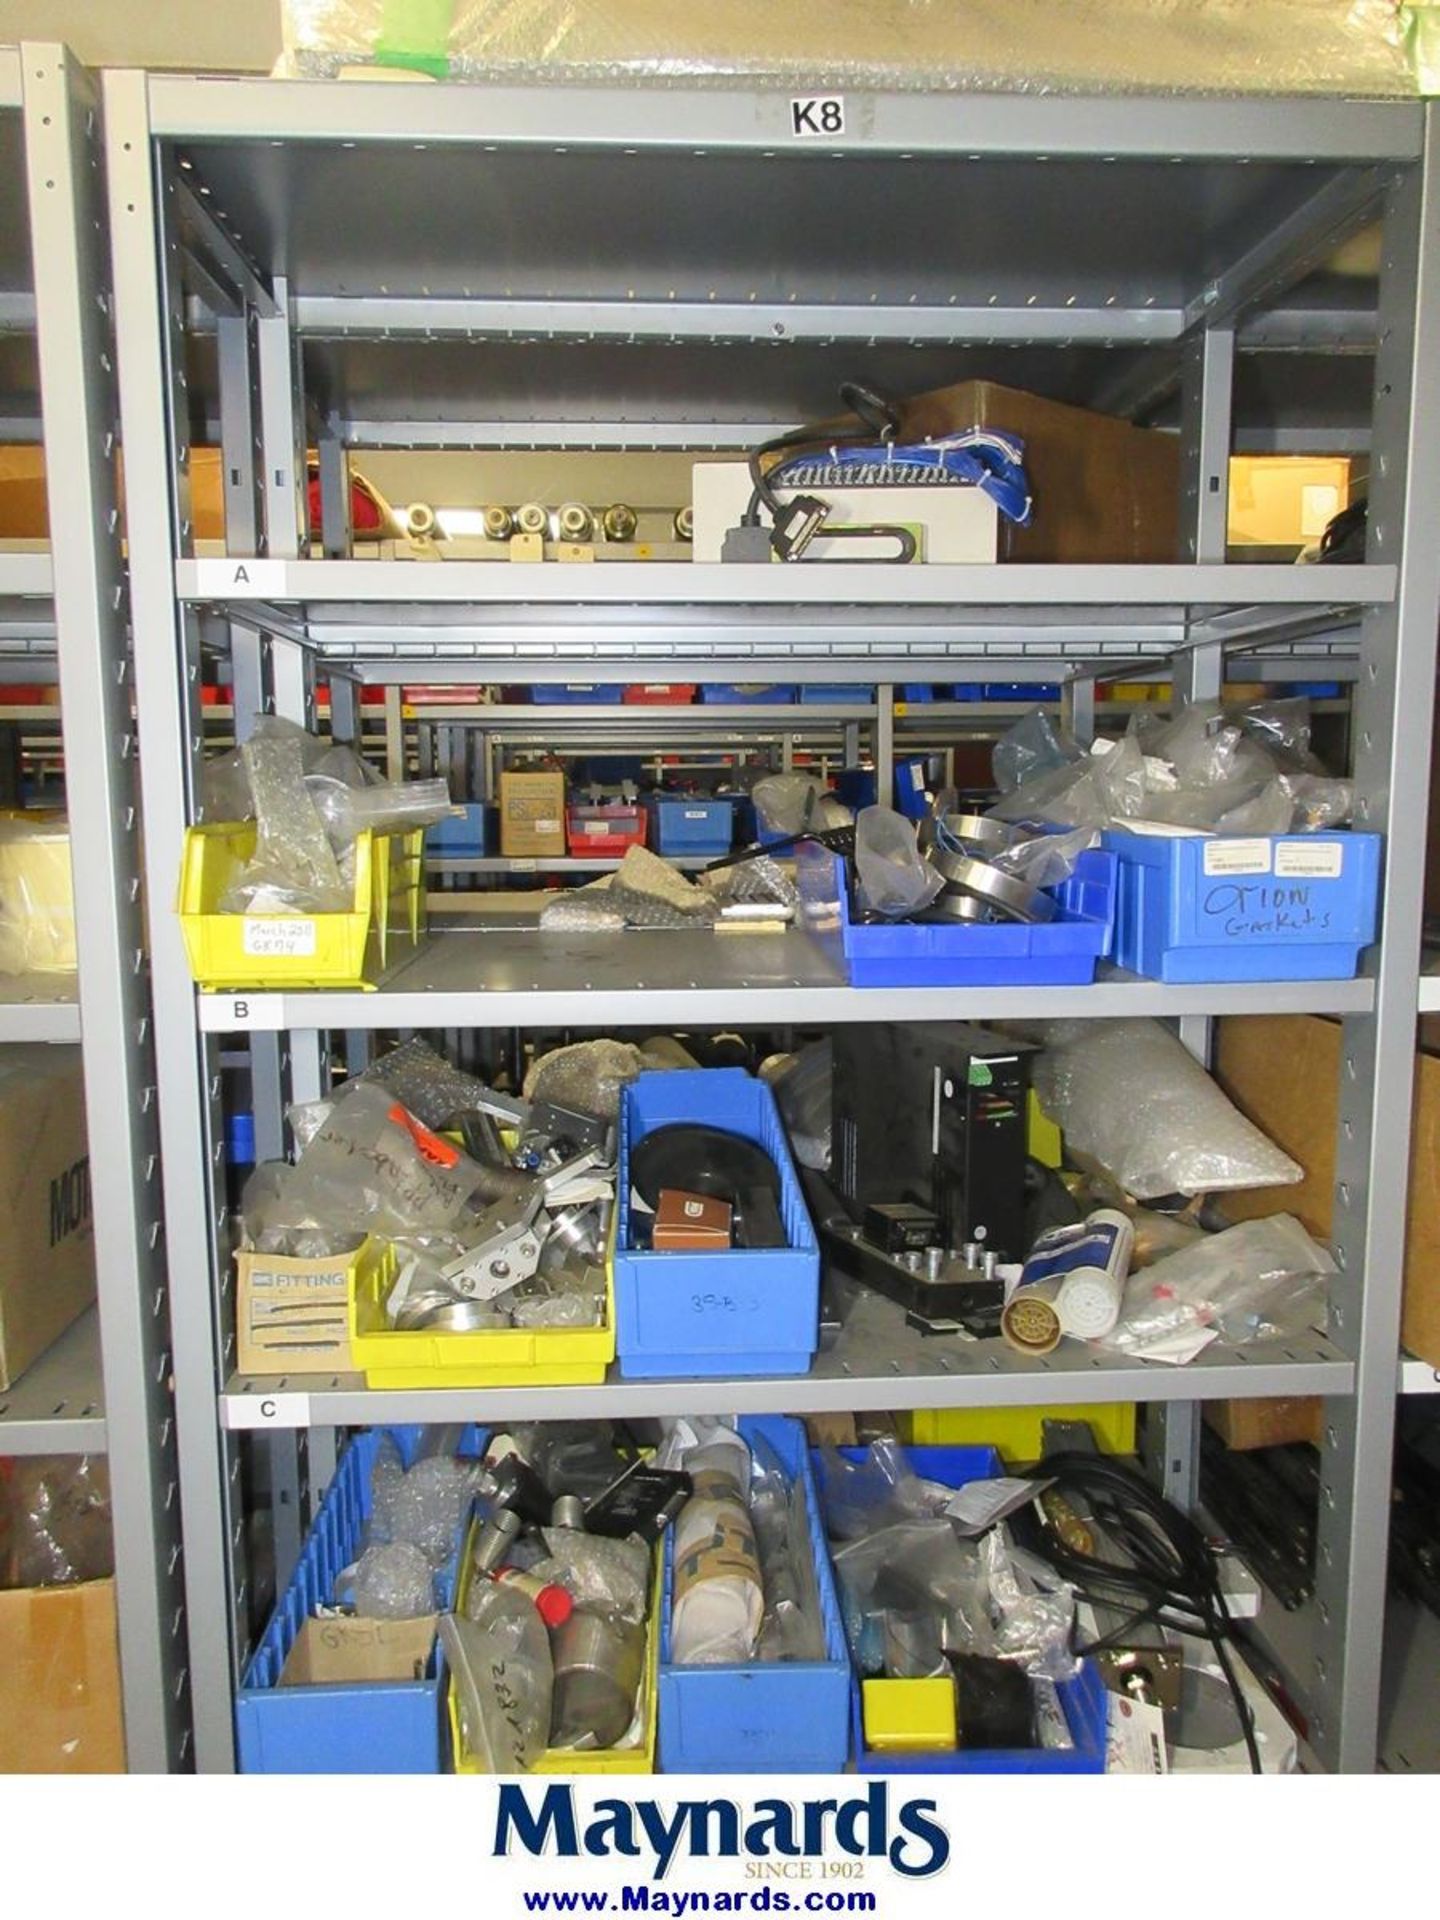 Large Lot of Electrical Controls, PLC's, Drives & Remaining Contents of Maint. Parts Crib - Image 20 of 107